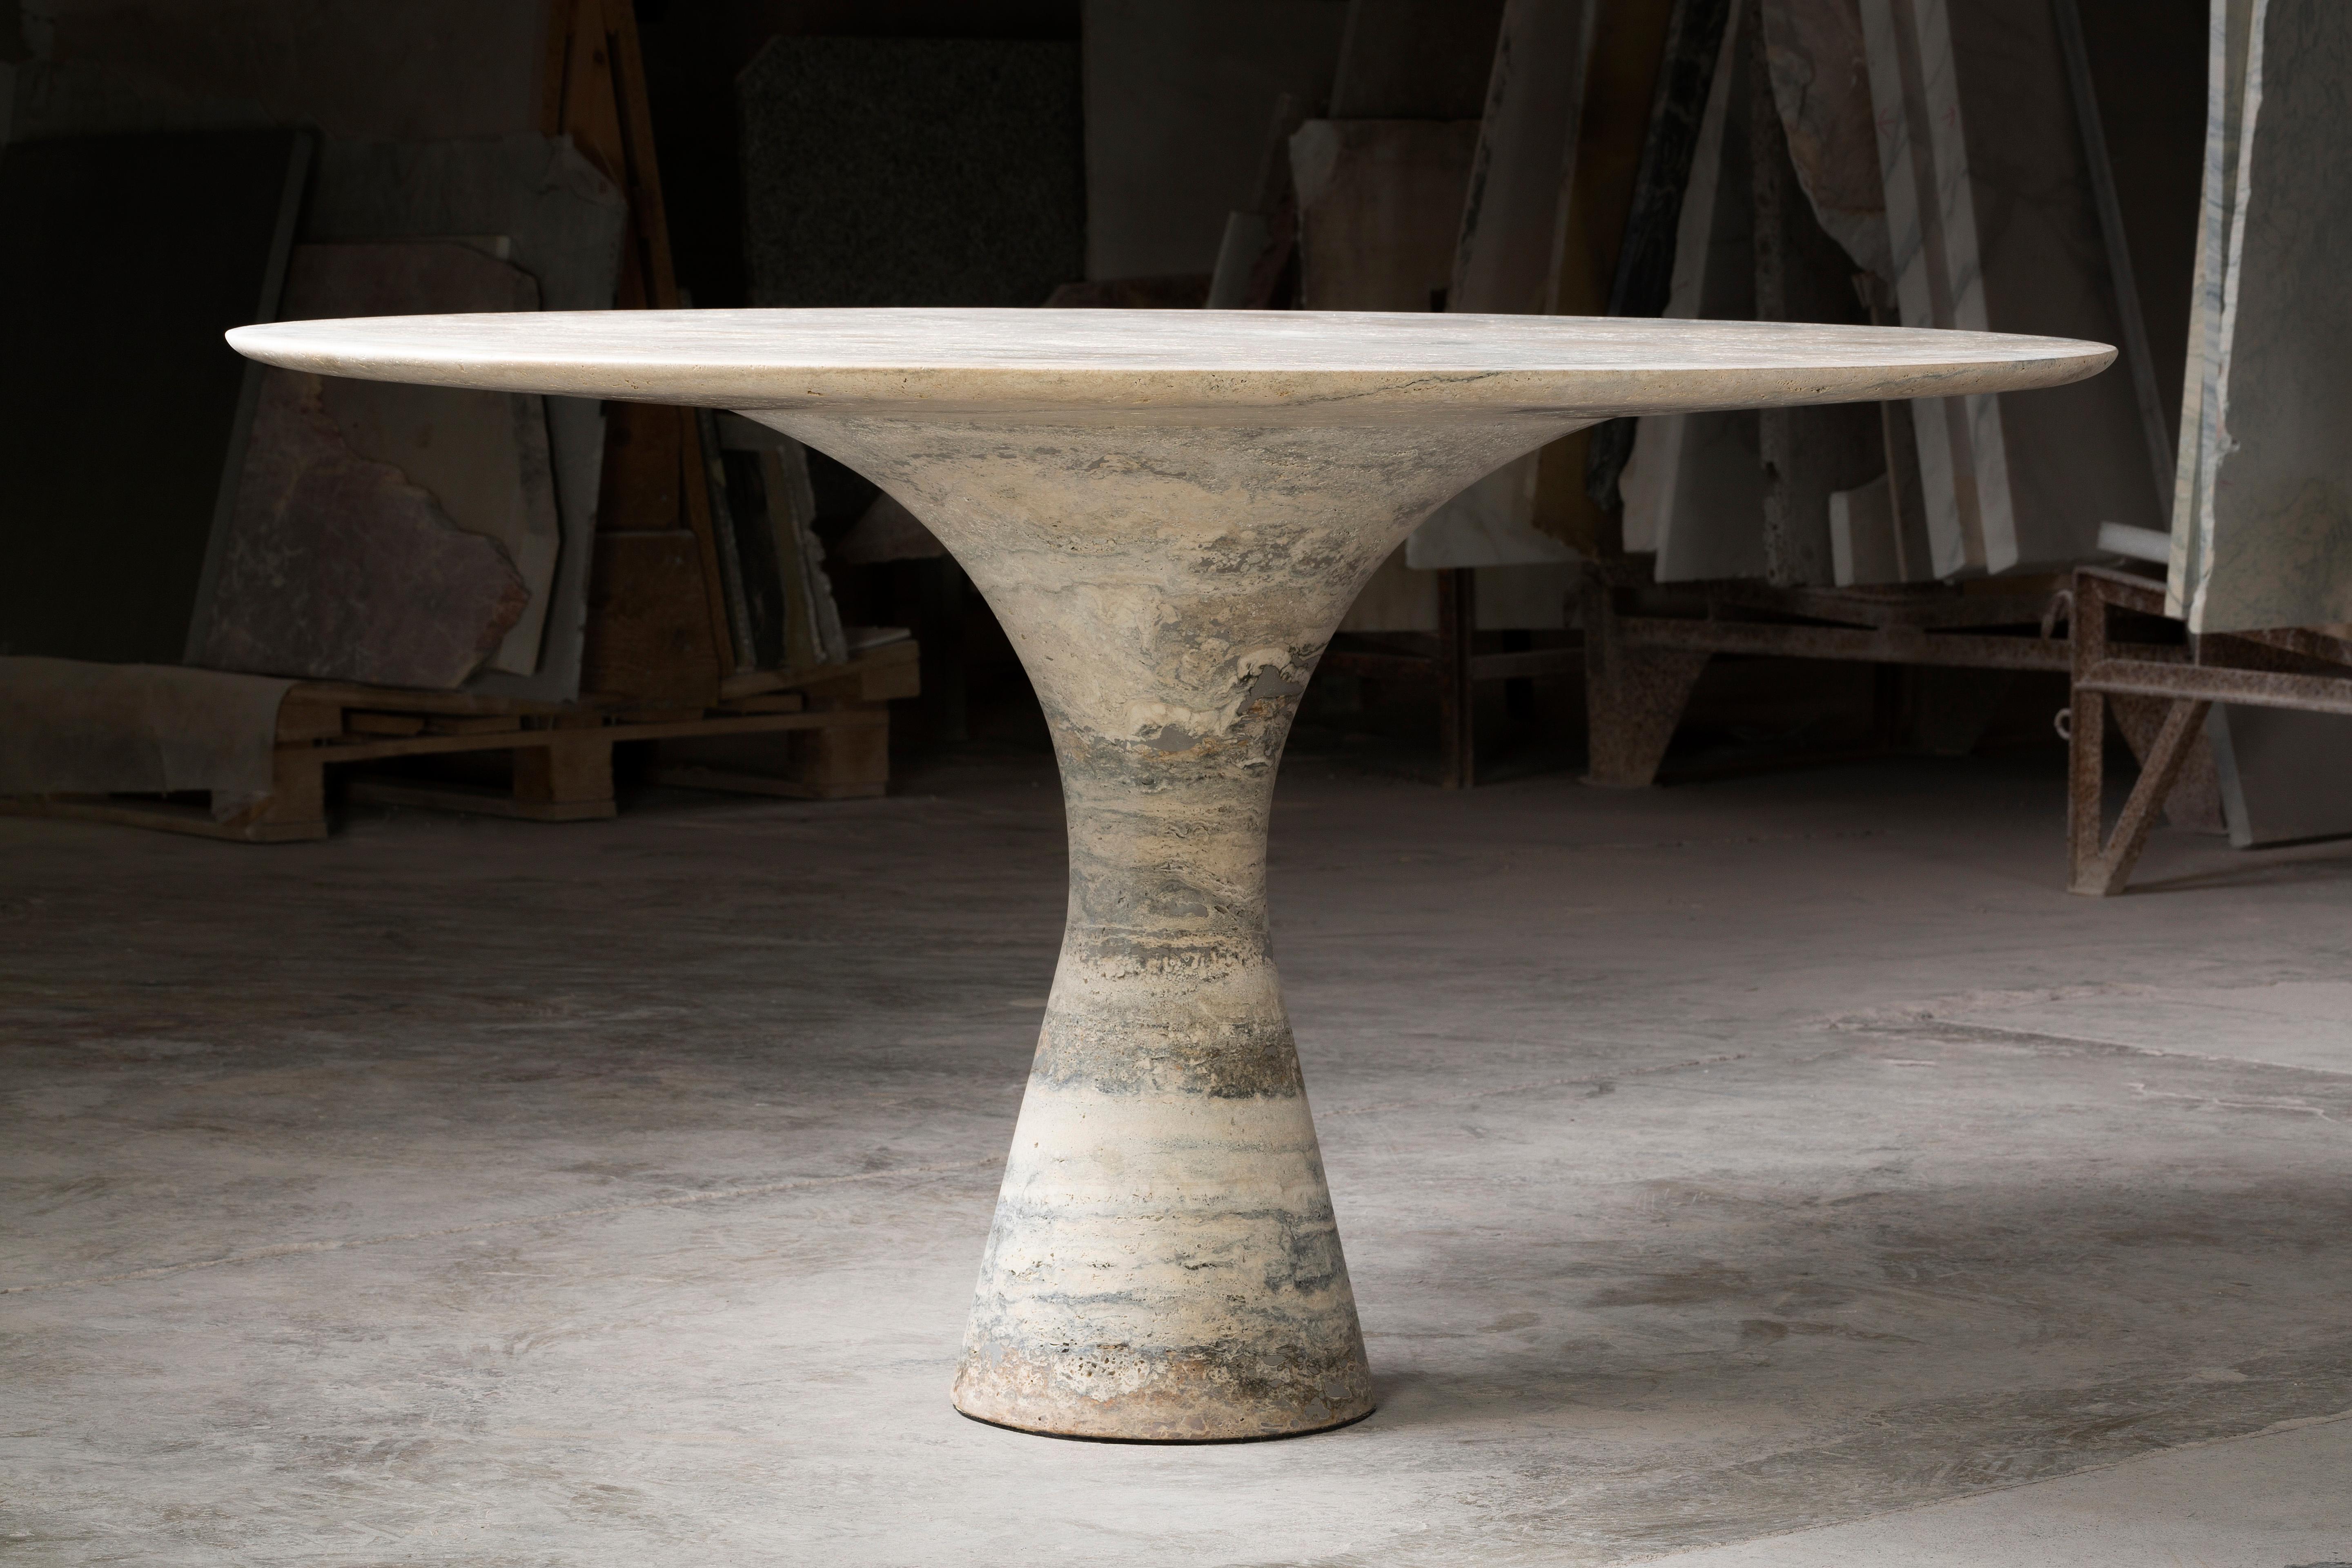 Grey Saint Laurent Refined Contemporary Marble Dining Table 250/75 For Sale 3